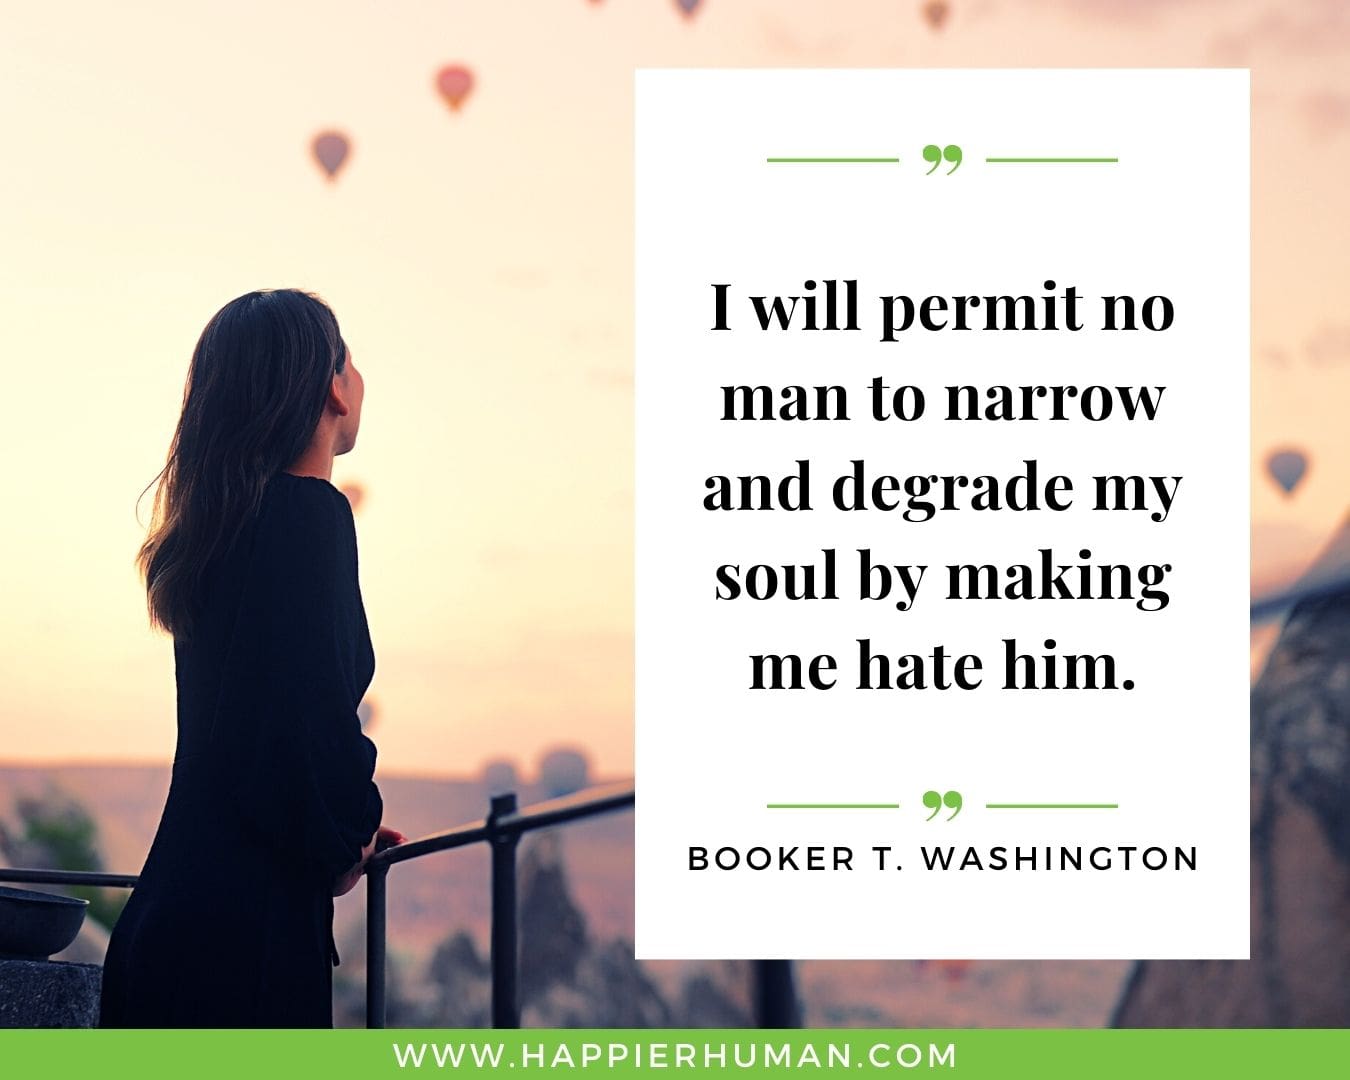 Haters Quotes - “I will permit no man to narrow and degrade my soul by making me hate him” - Booker T. Washington